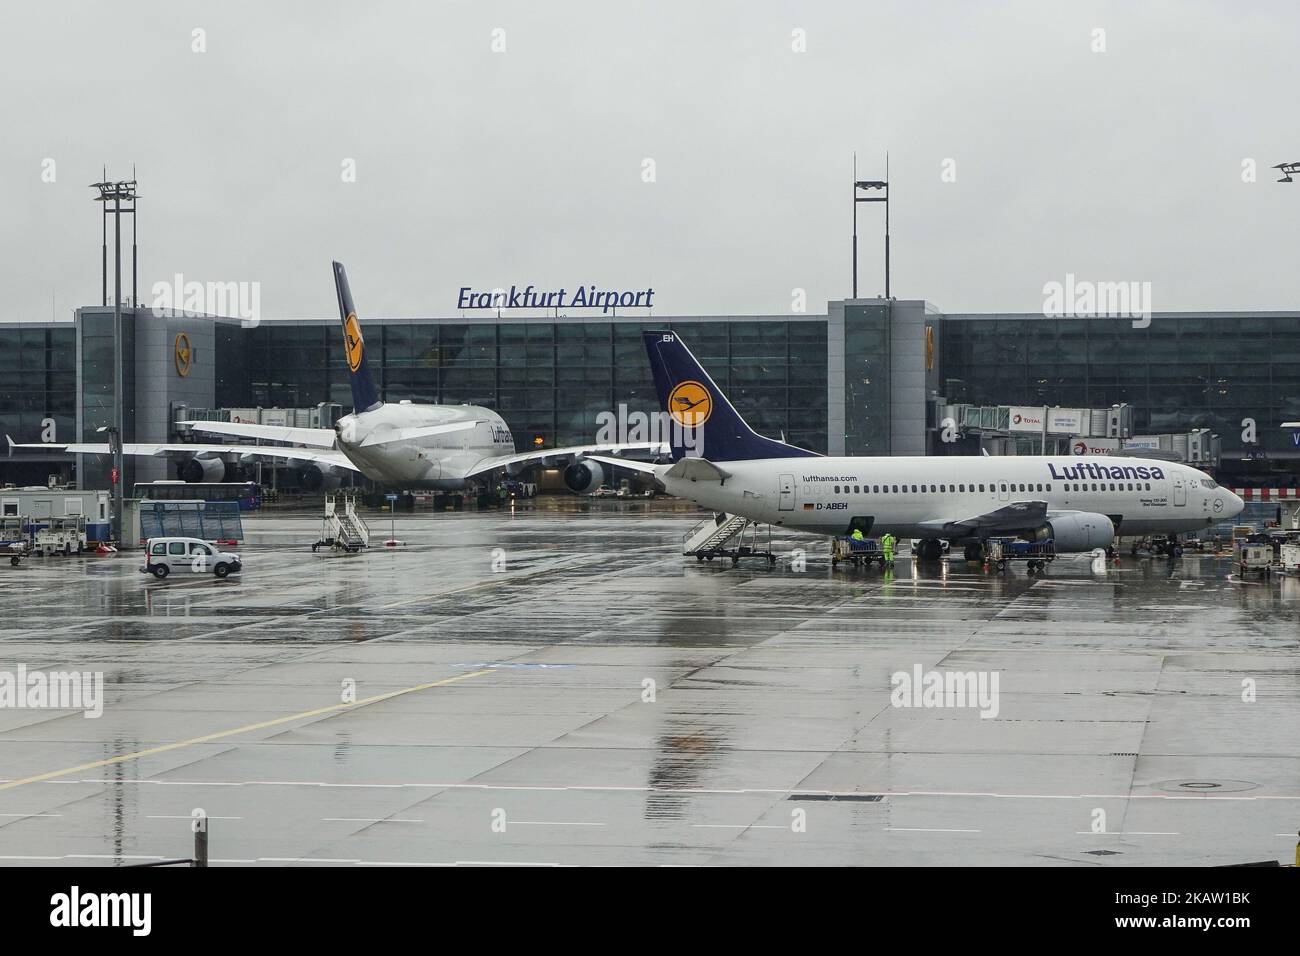 Lufthansa's fleet as seen in Frankfurt Airport in Germany, the primary hub for the airline. Lufthansa is the world's 10th largest airline by passengers carried in 2016. The airline owns a fleeet of 273 aircrafts and 130 orders. Lufthansa both operates the super jumbo jets Airbus A380 and Boeing 747-8 and 747-400. Lufthansa is also the launch customer of the Airbus A320neo series and already flies the A350. The airline is one of the founder members of Star Alliance aviation affiliation. Frankfurt airport is an international airport connecting the German city to the world (Photo by Nicolas Econo Stock Photo